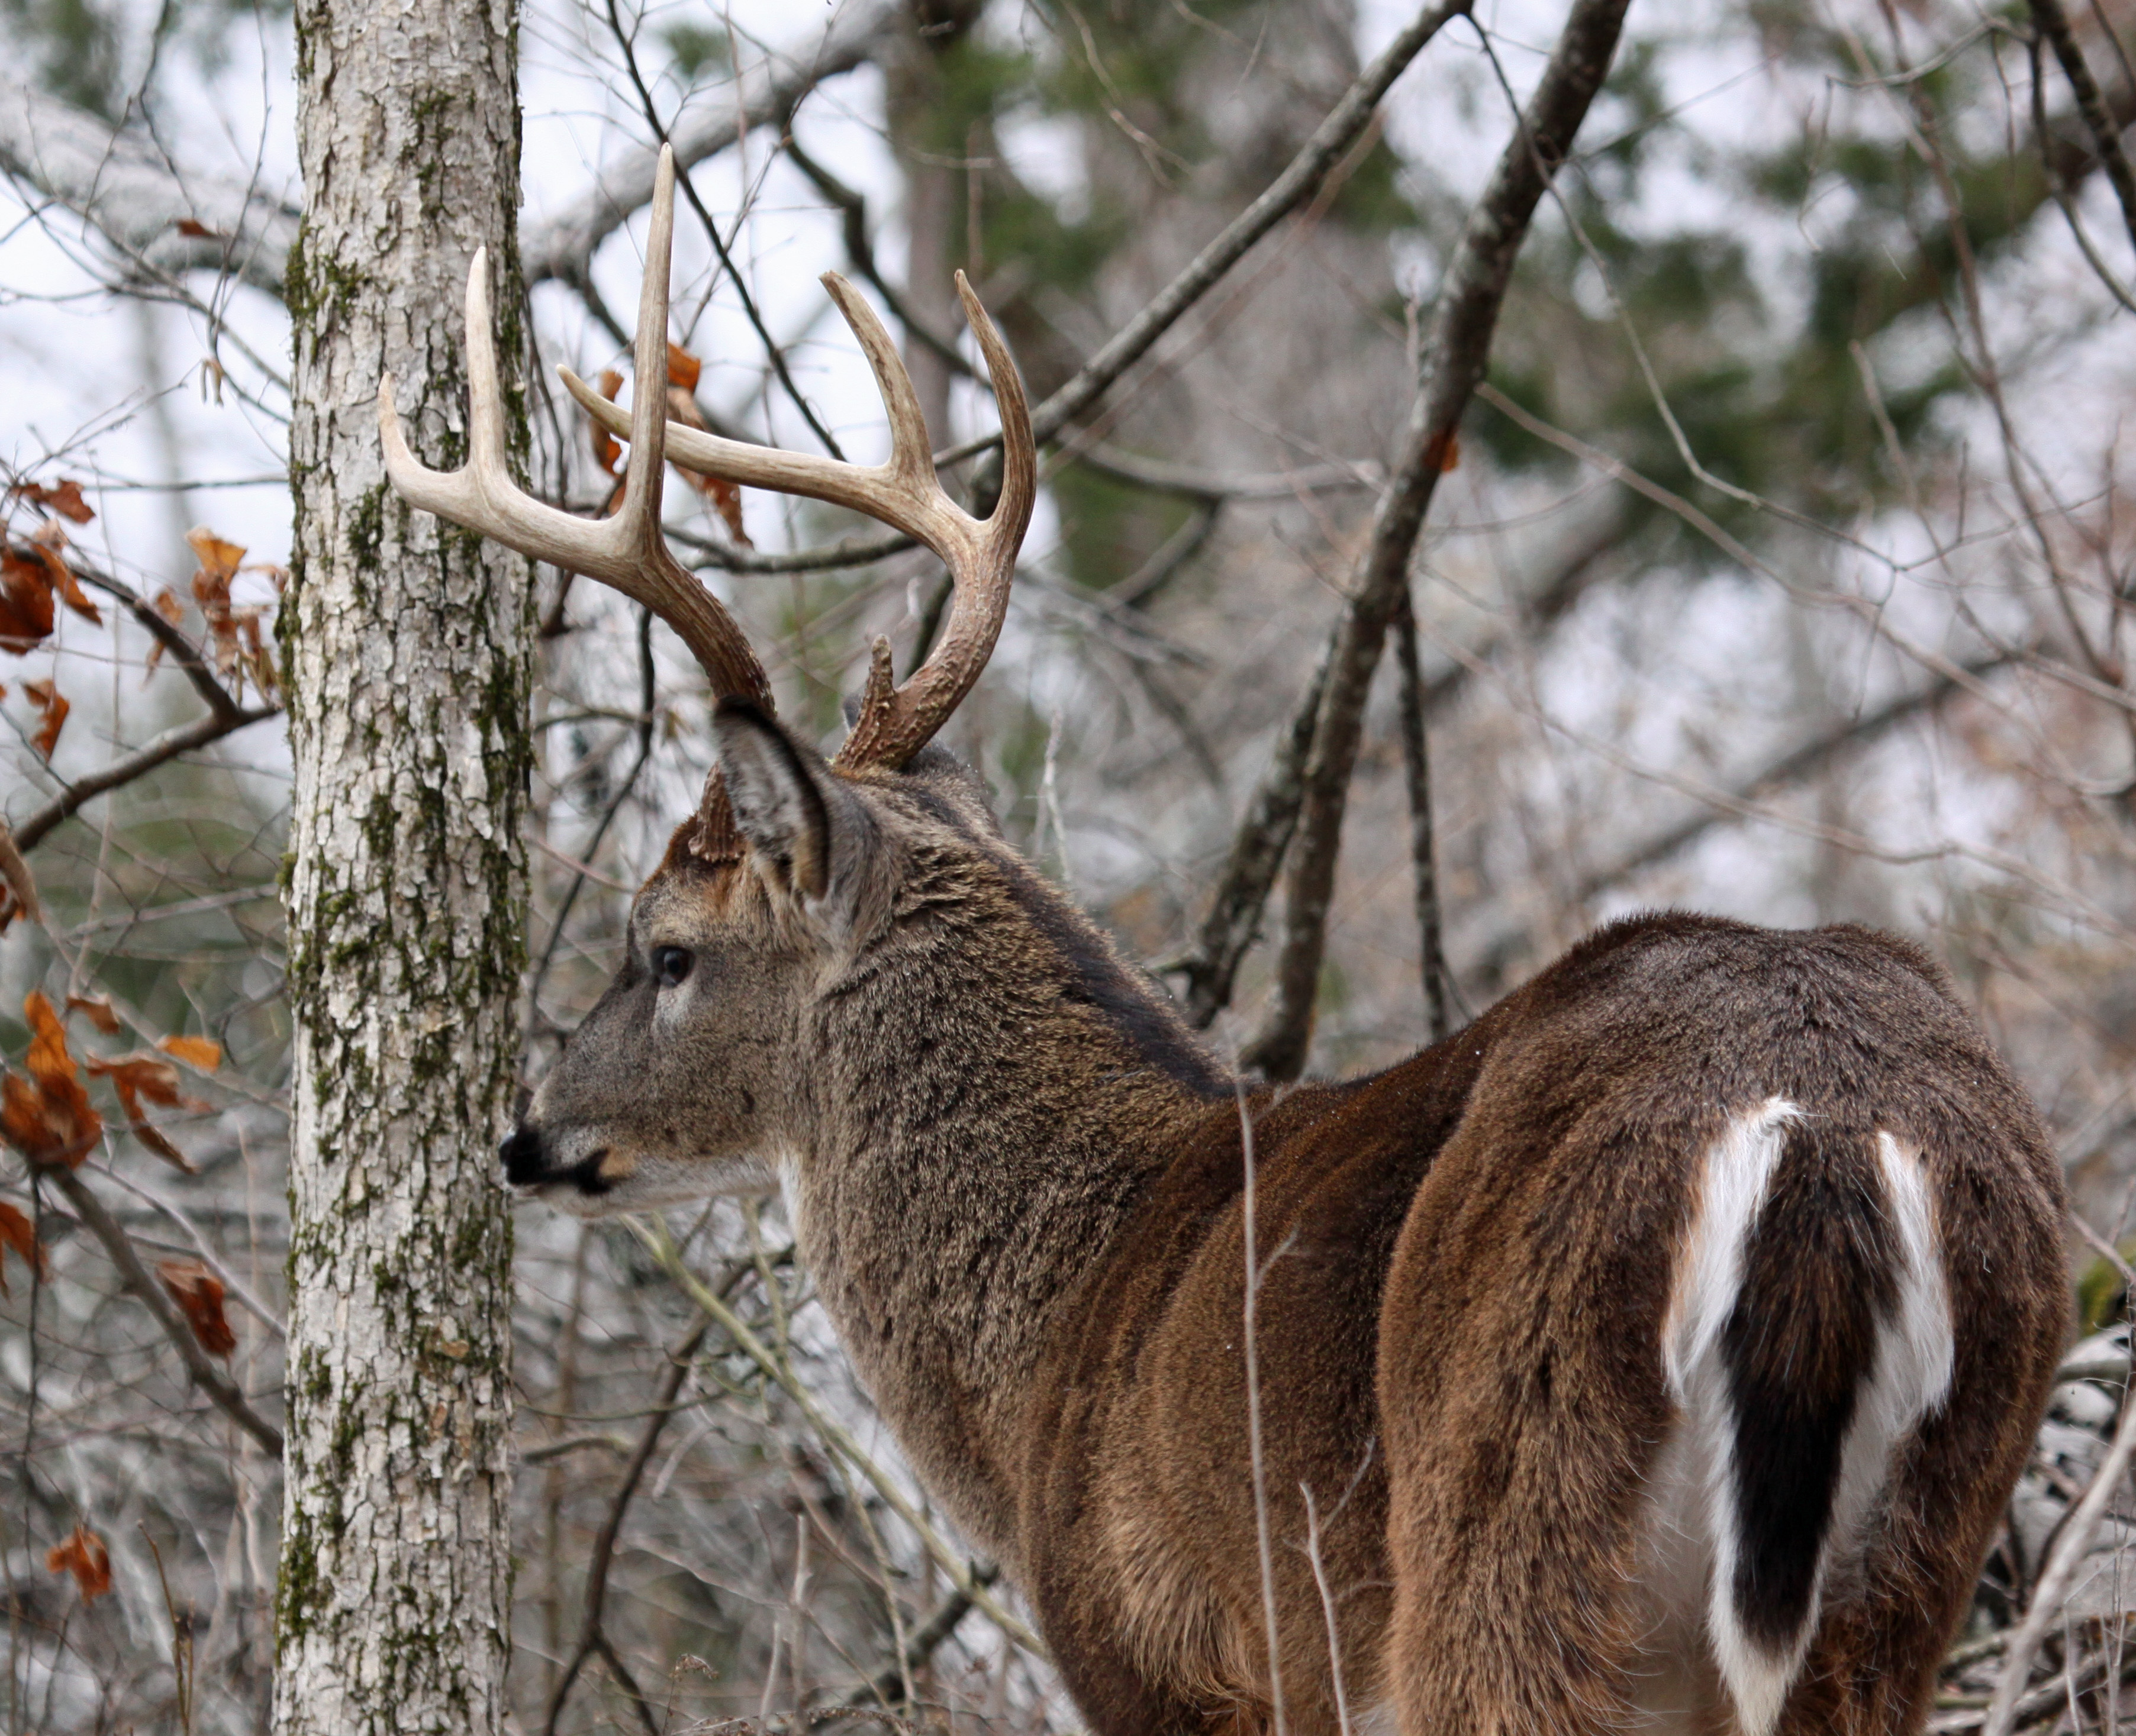 Modern Muzzleloader hunting can be challenging. But, when the smoke clears and your buck is on the ground, that reward makes for a great day outdoors.